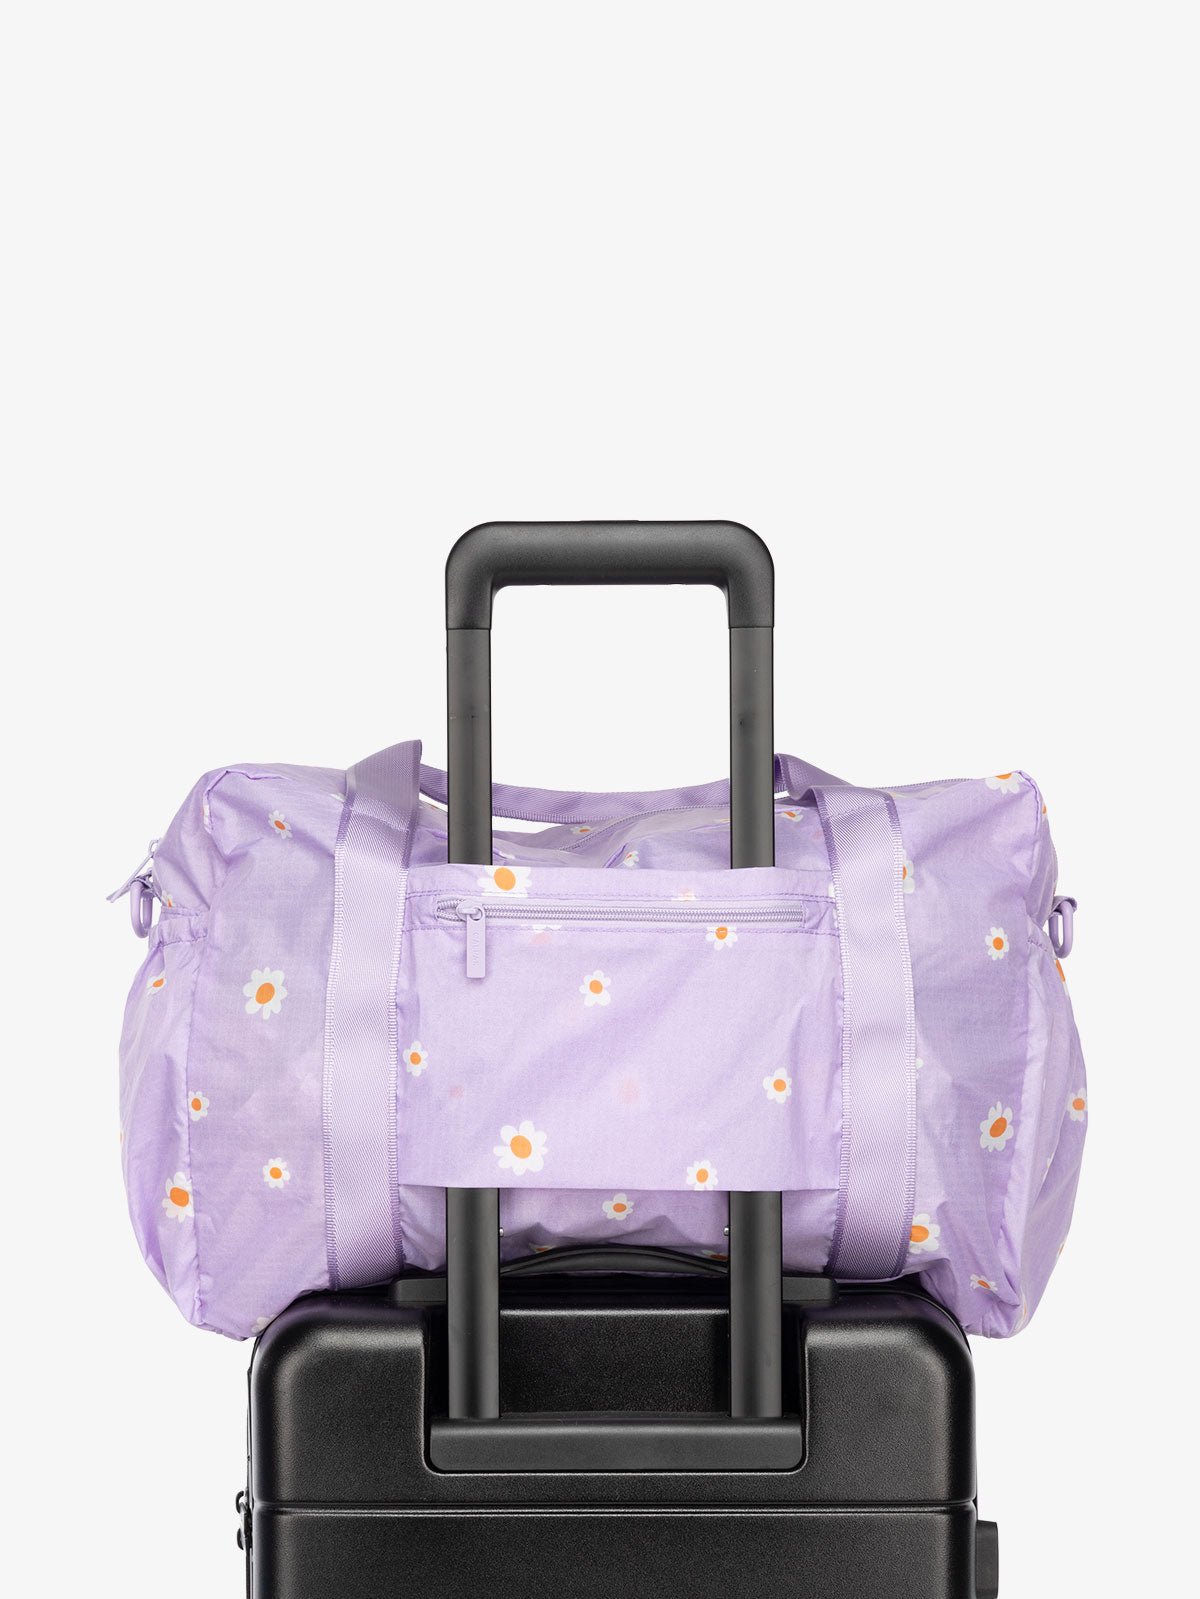 CALPAK Compakt nylon duffle bag with trolley sleeve and zippered pocket in orchid fields lavender